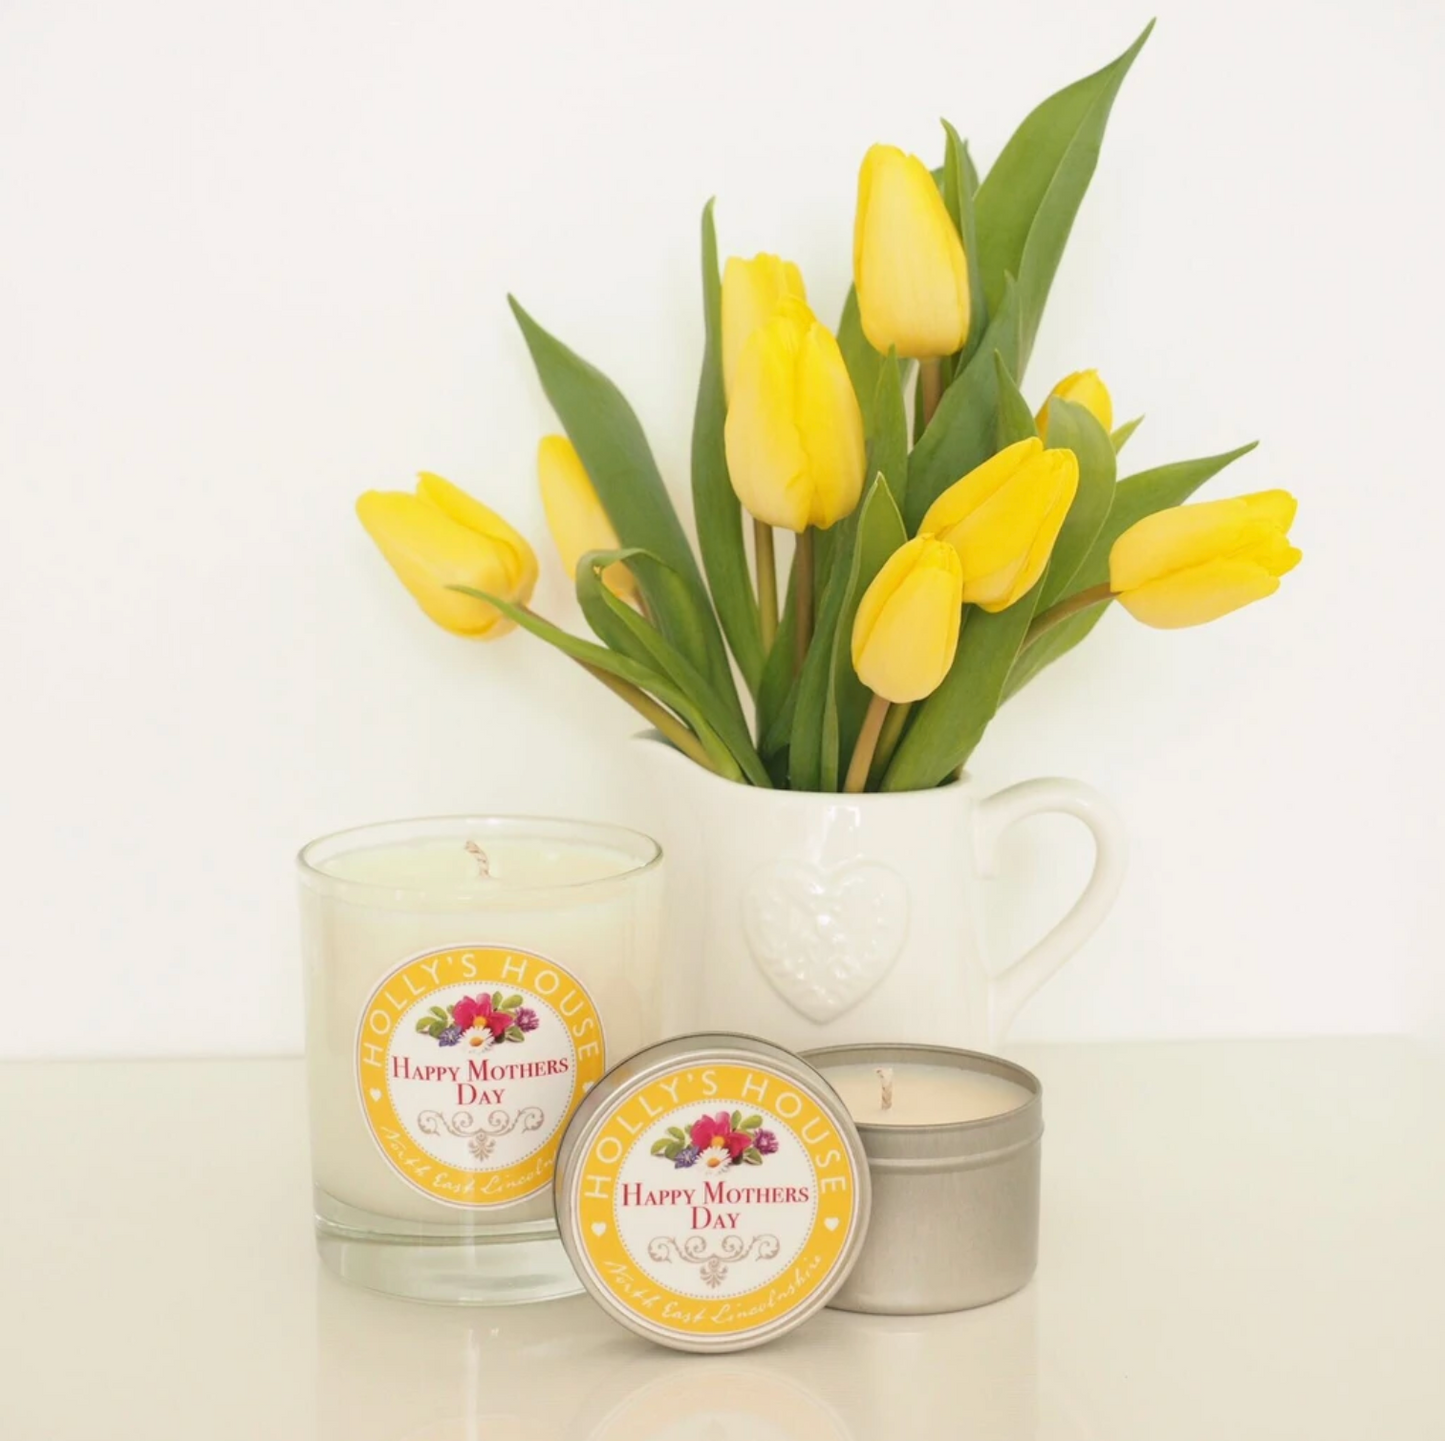 'Happy Mothers Day' Scented Candle